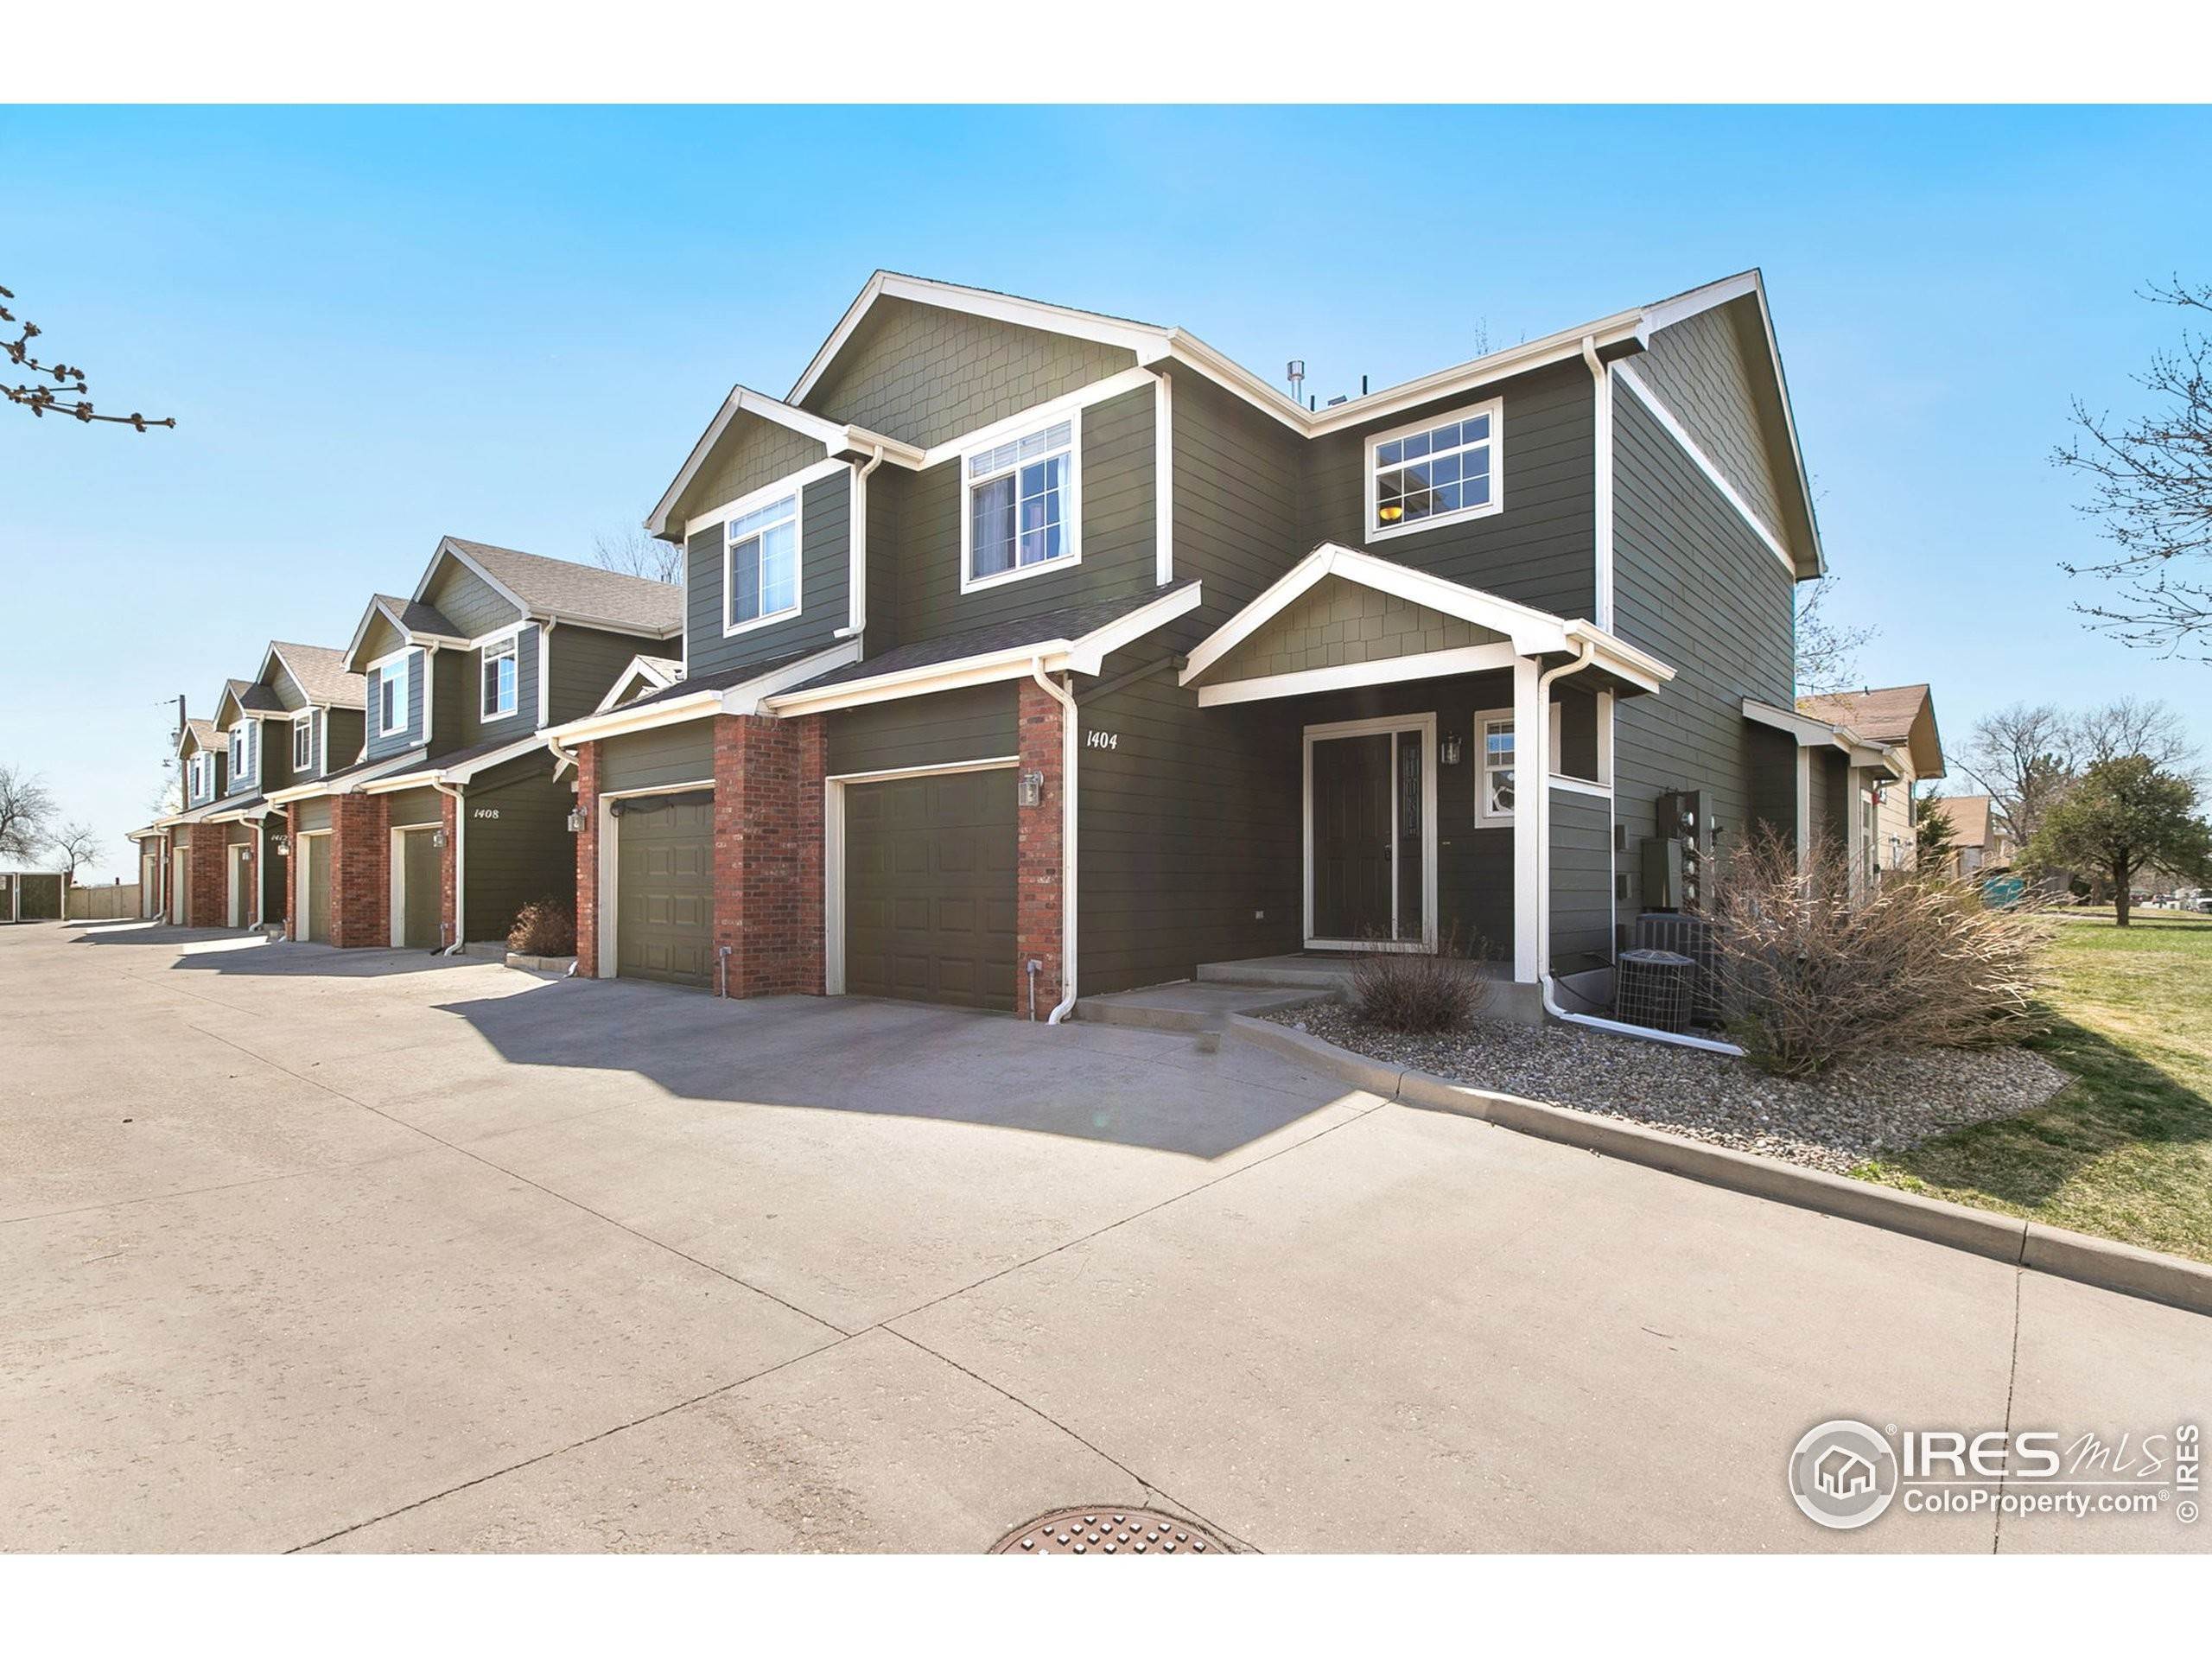 2. Single Family Homes for Active at 1404 S California Avenue Loveland, Colorado 80537 United States